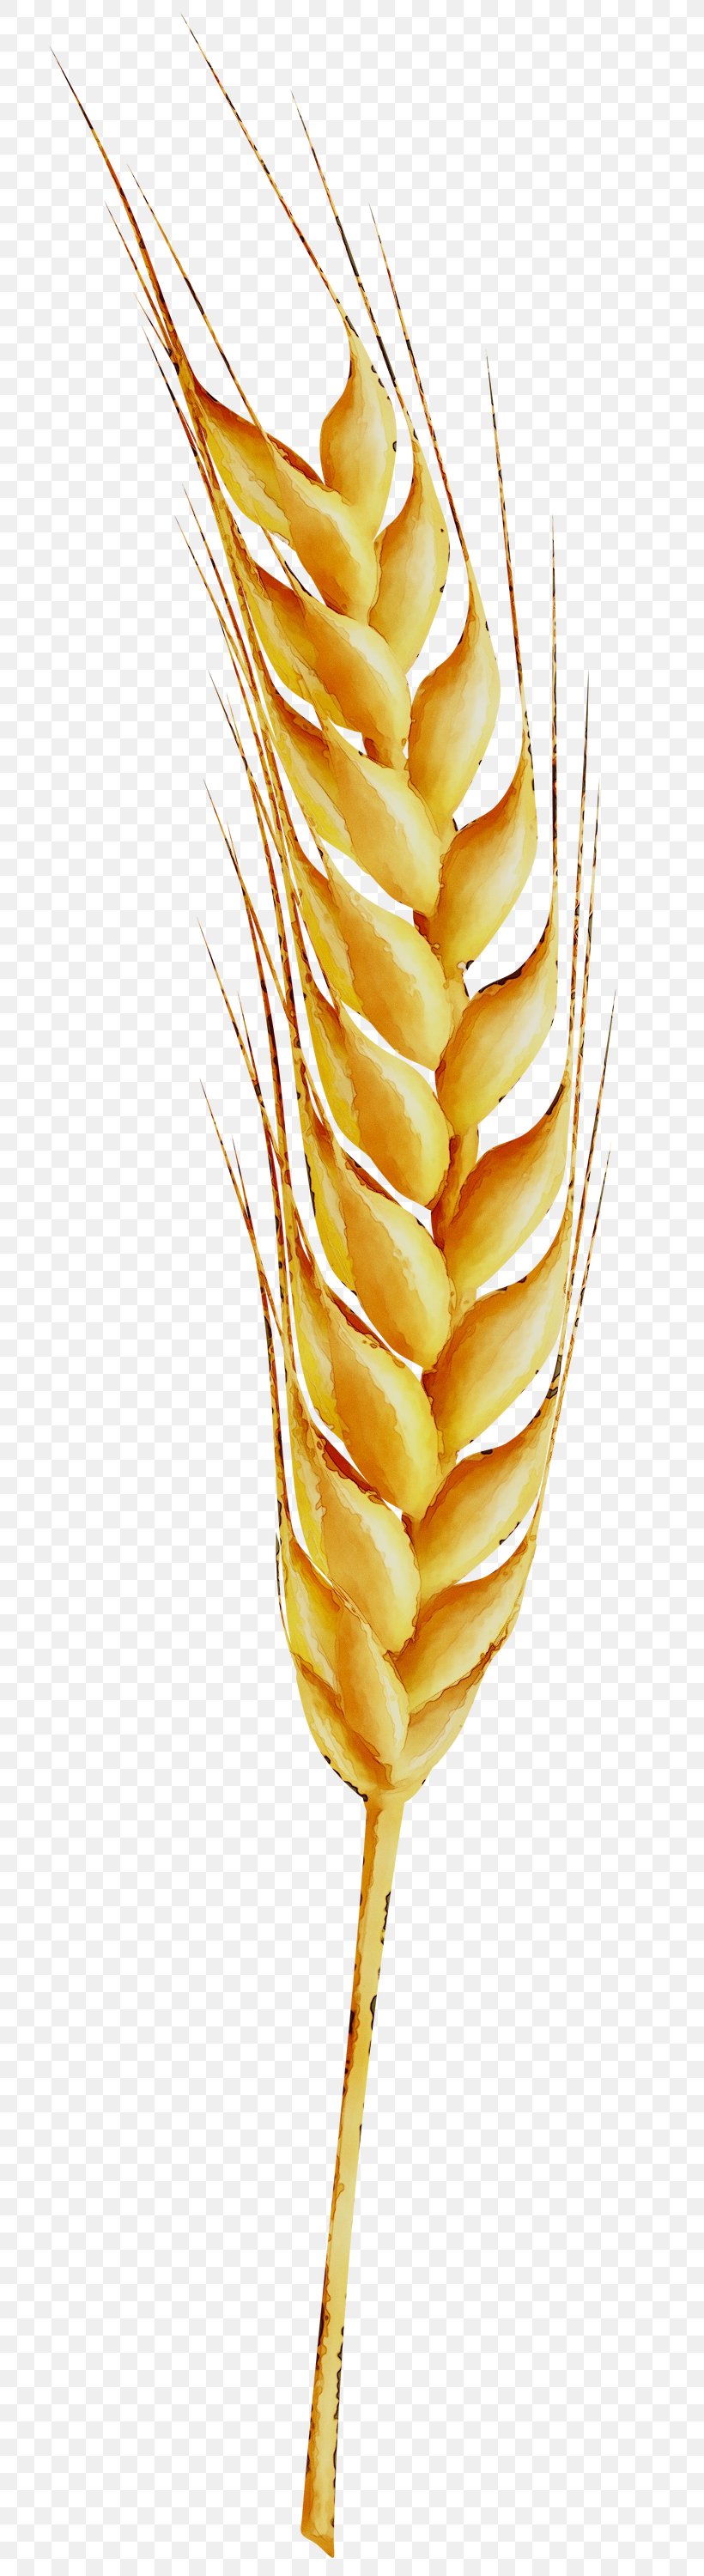 Grasses Wheat Grain Image, PNG, 712x3000px, Grasses, Cereal, Commodity, Flowering Plant, Food Download Free